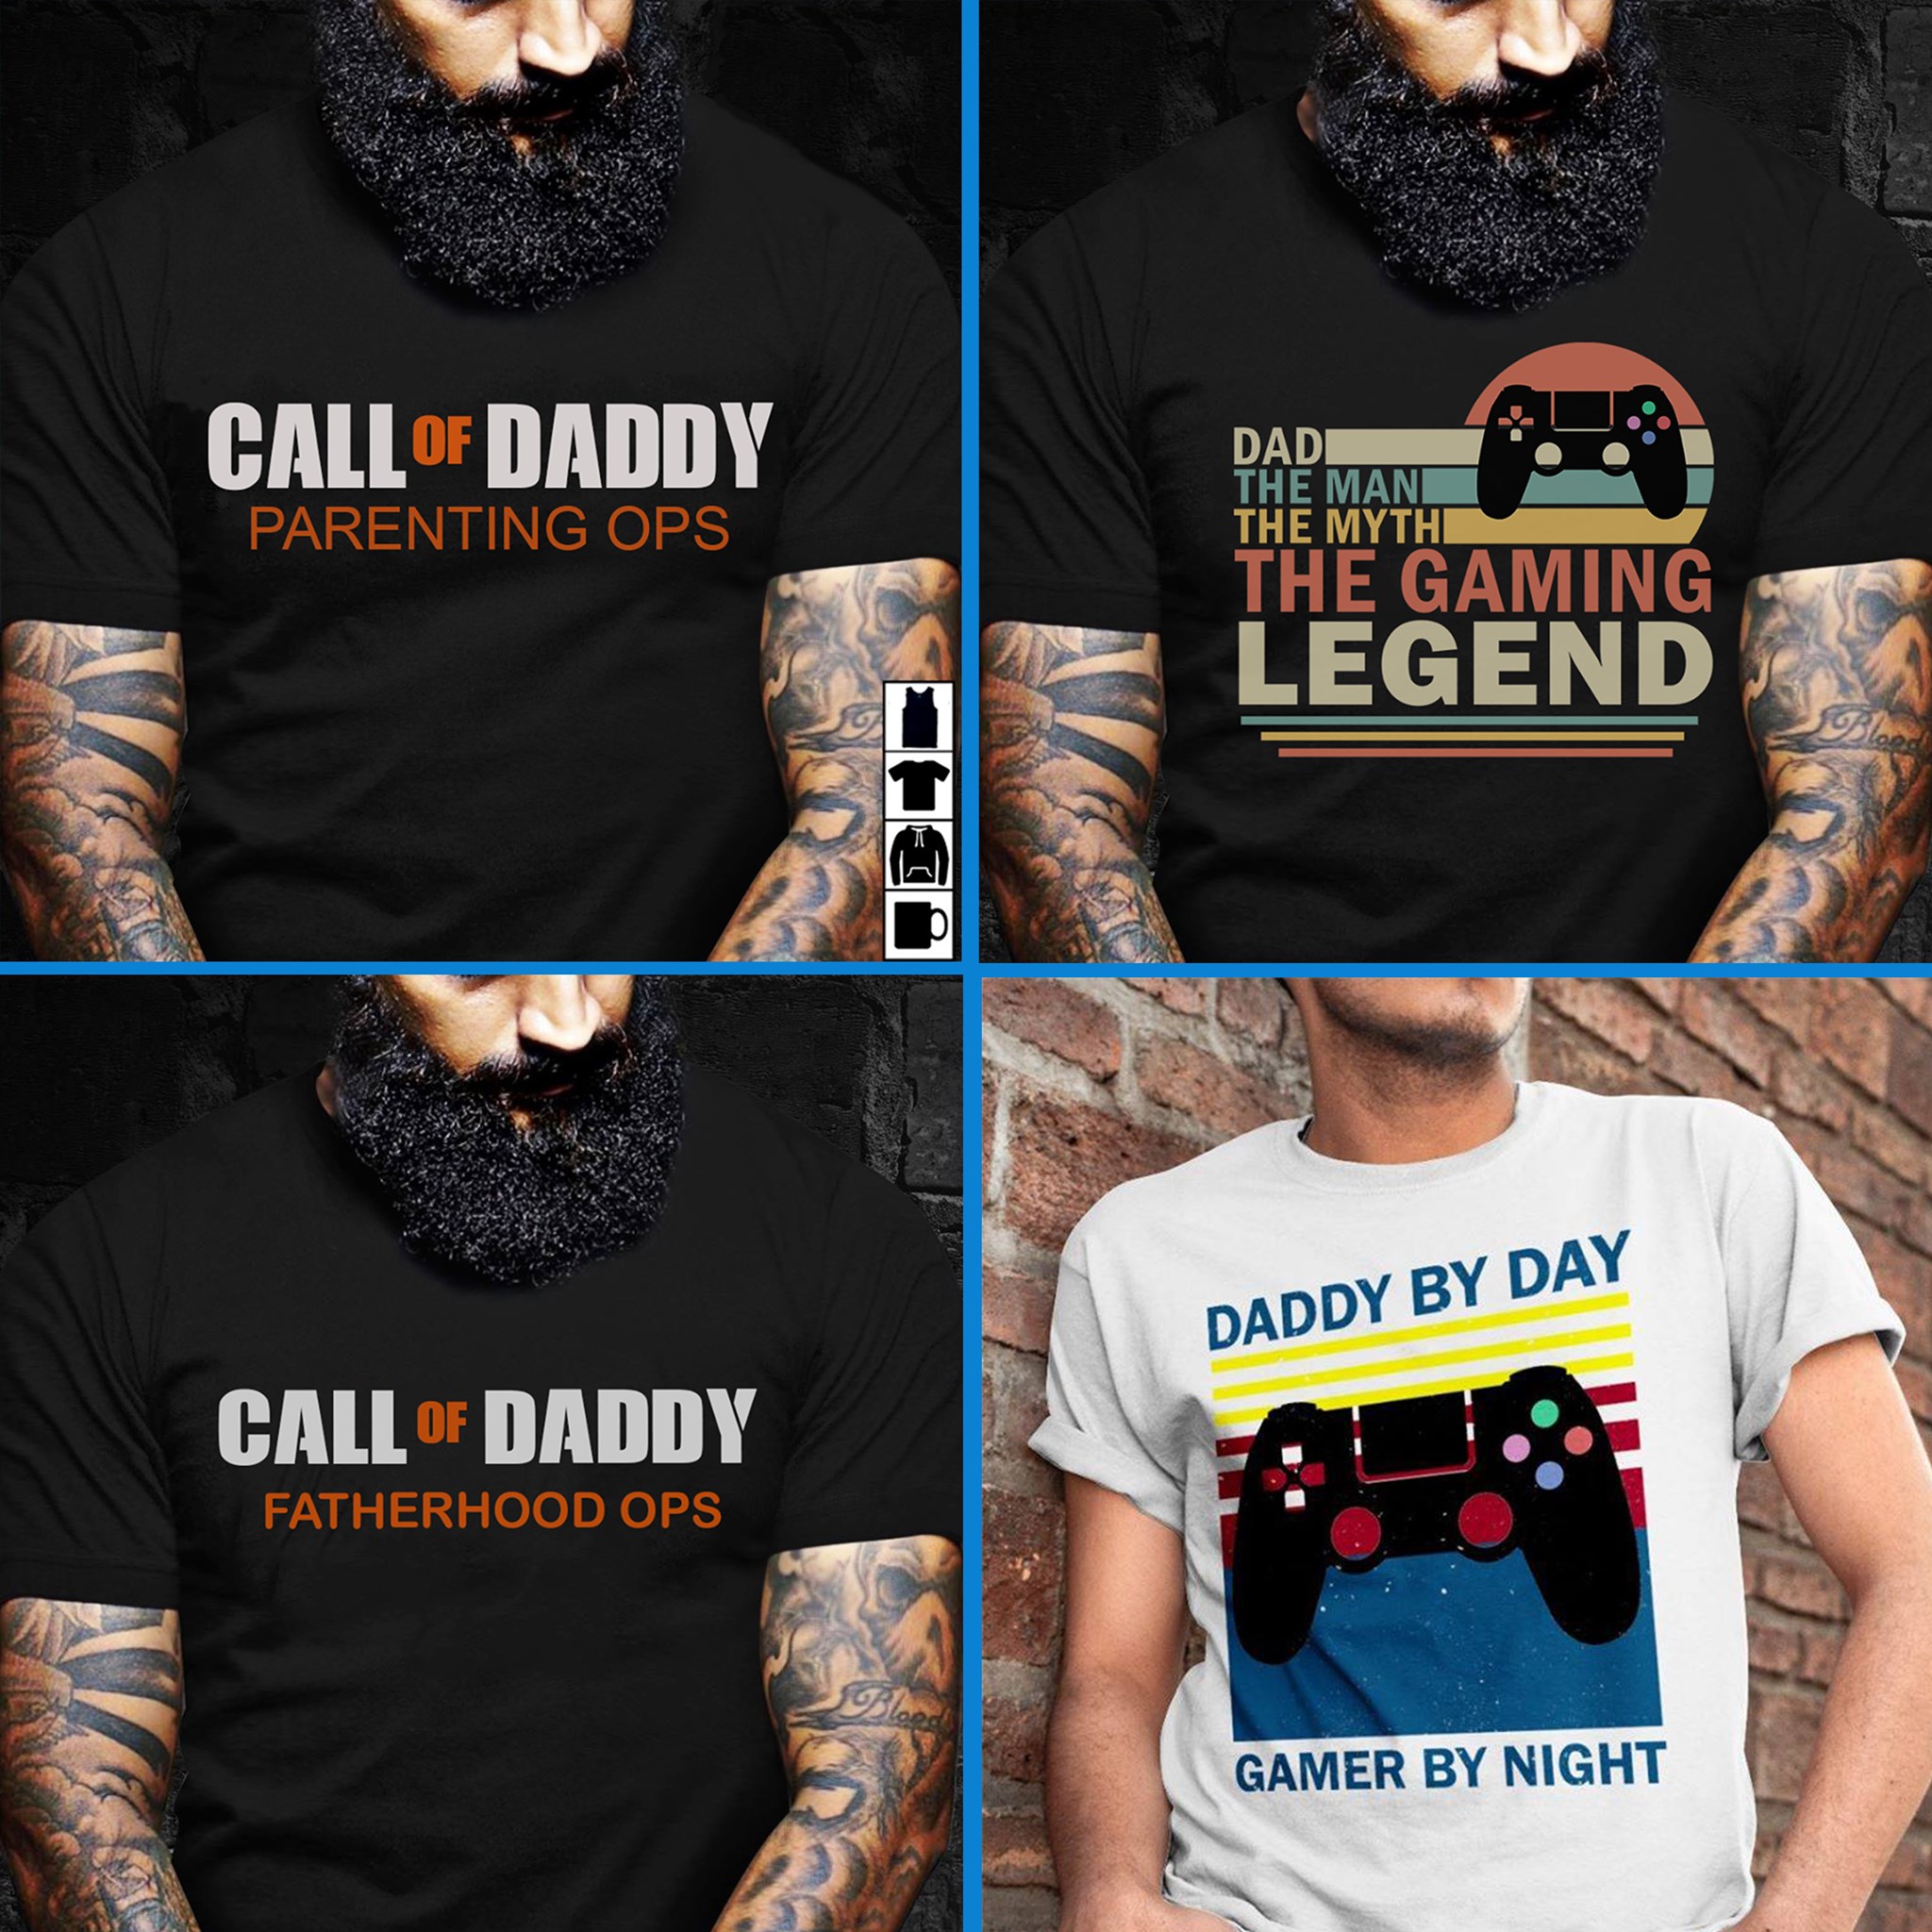 call of daddy parenting ops. call of daddy fatherhood ops. dad the man the myth the gaming legend. daddy by day gamer by night